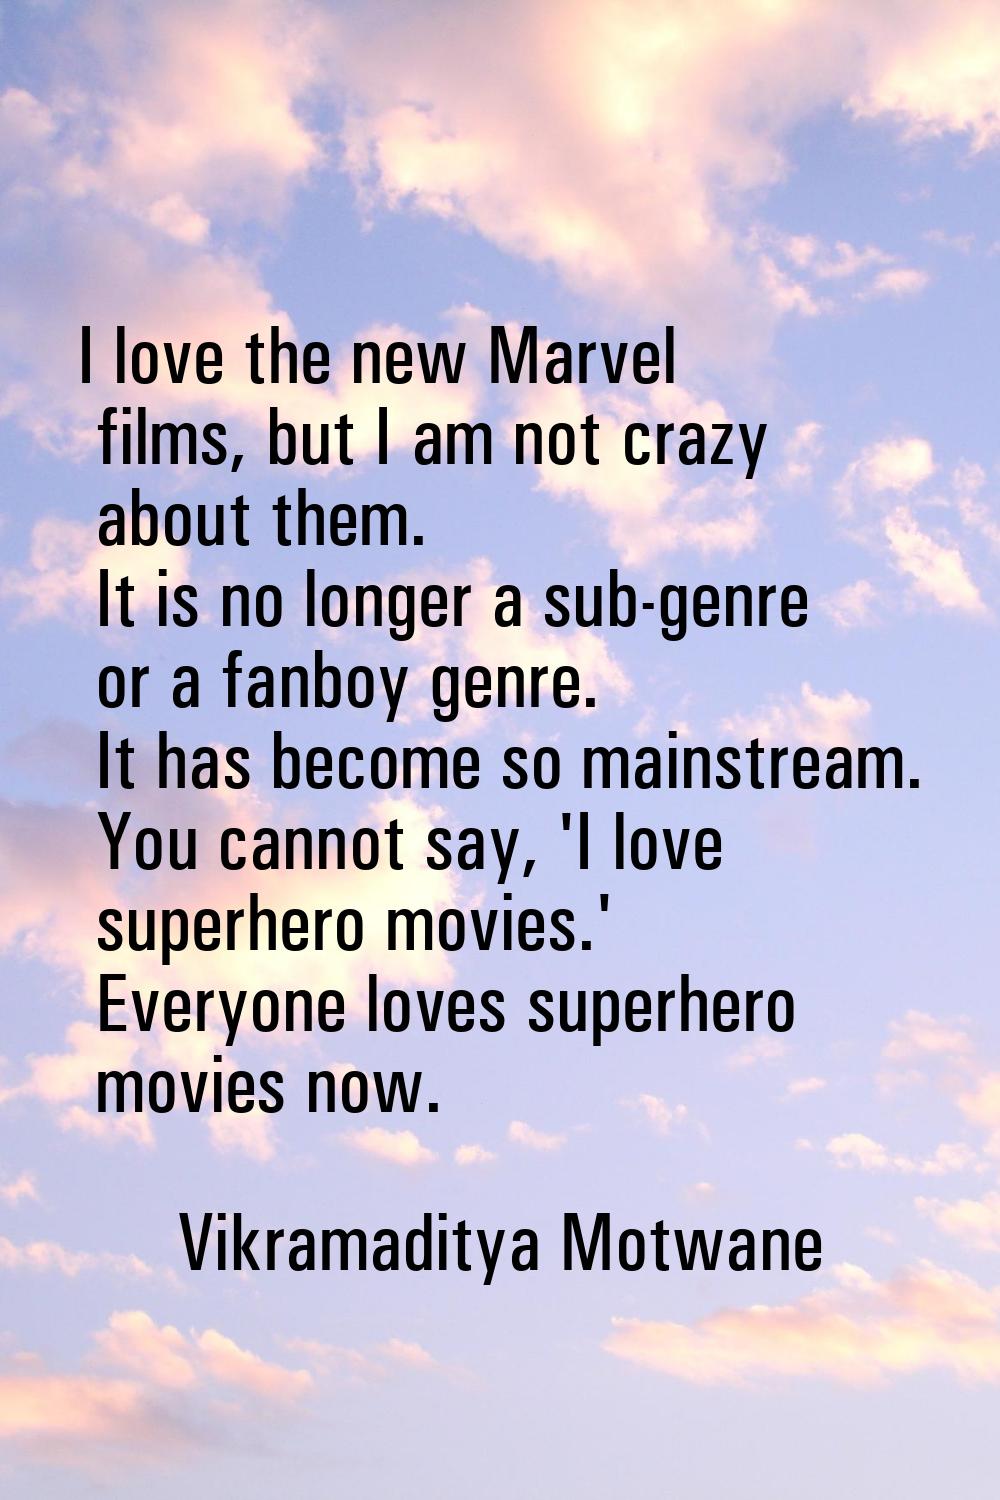 I love the new Marvel films, but I am not crazy about them. It is no longer a sub-genre or a fanboy